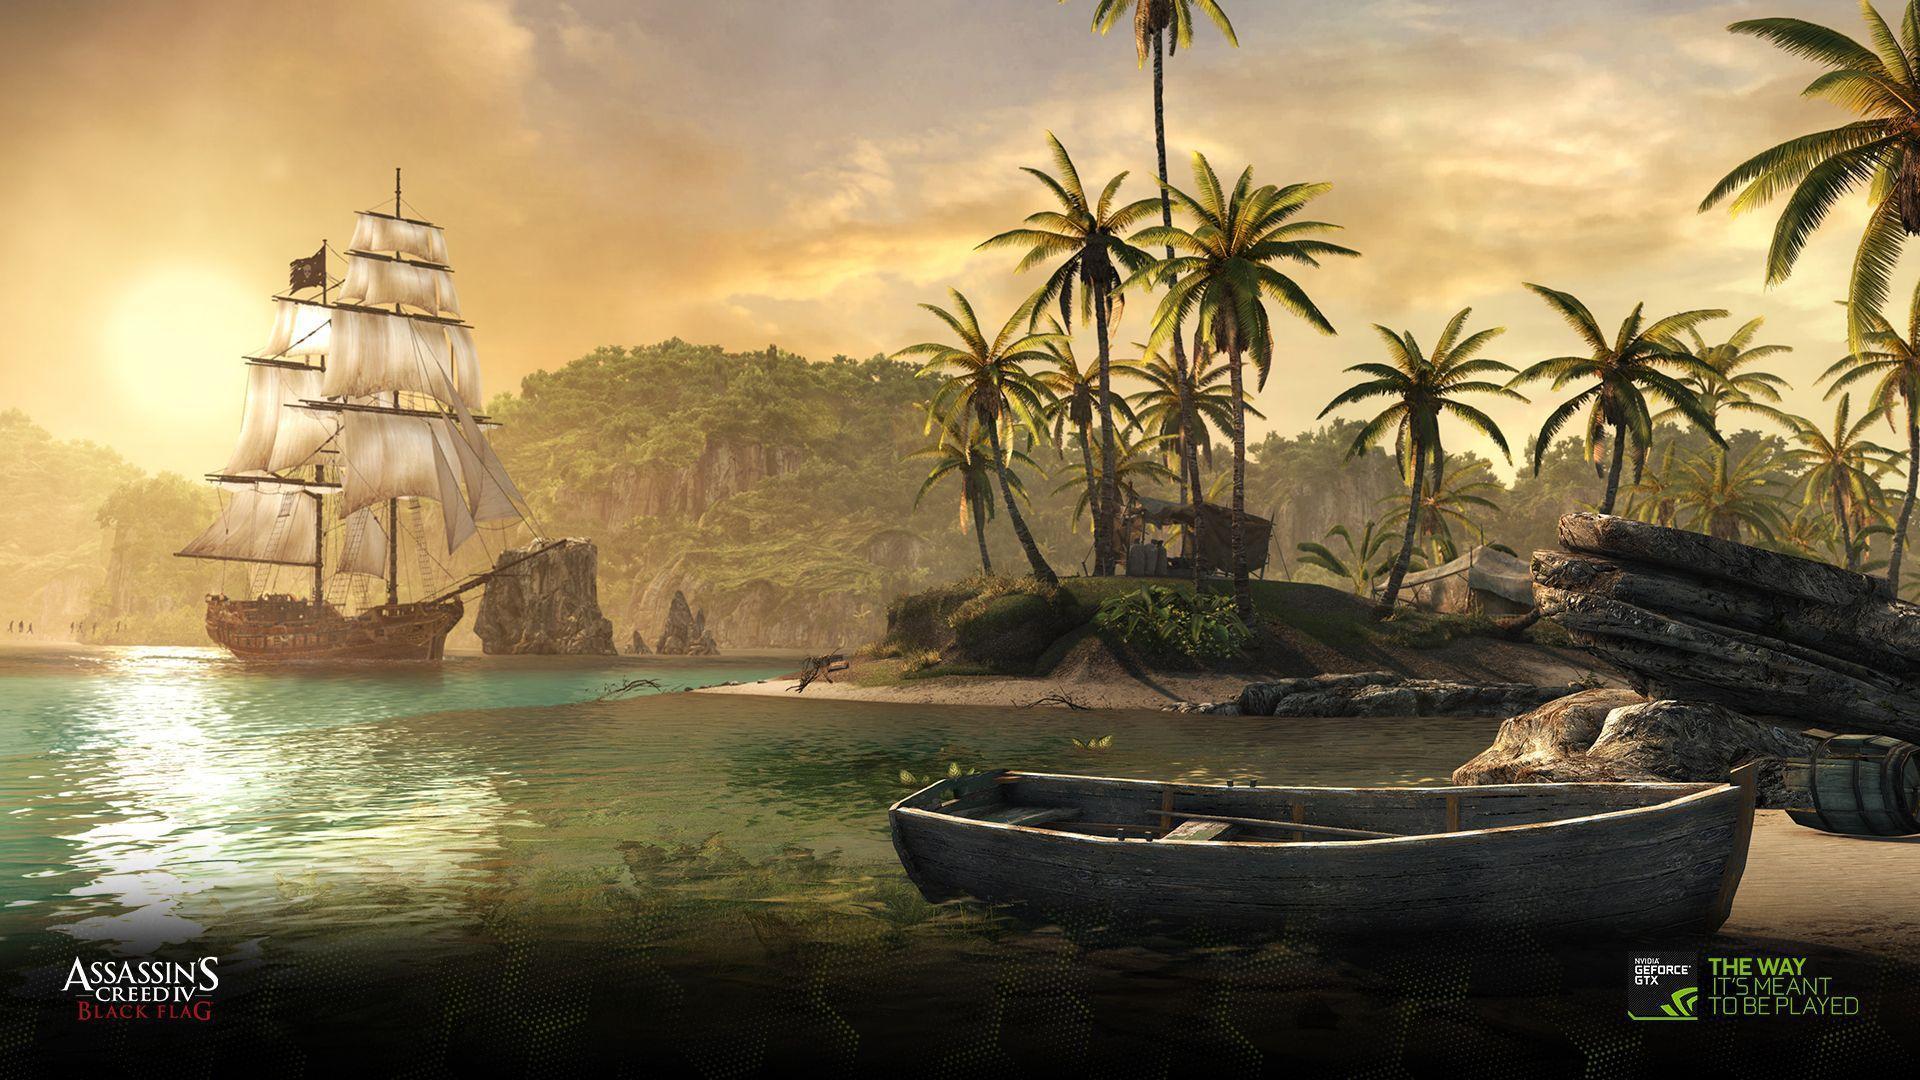 Download The Assassin's Creed IV Black Flag Wallpaper